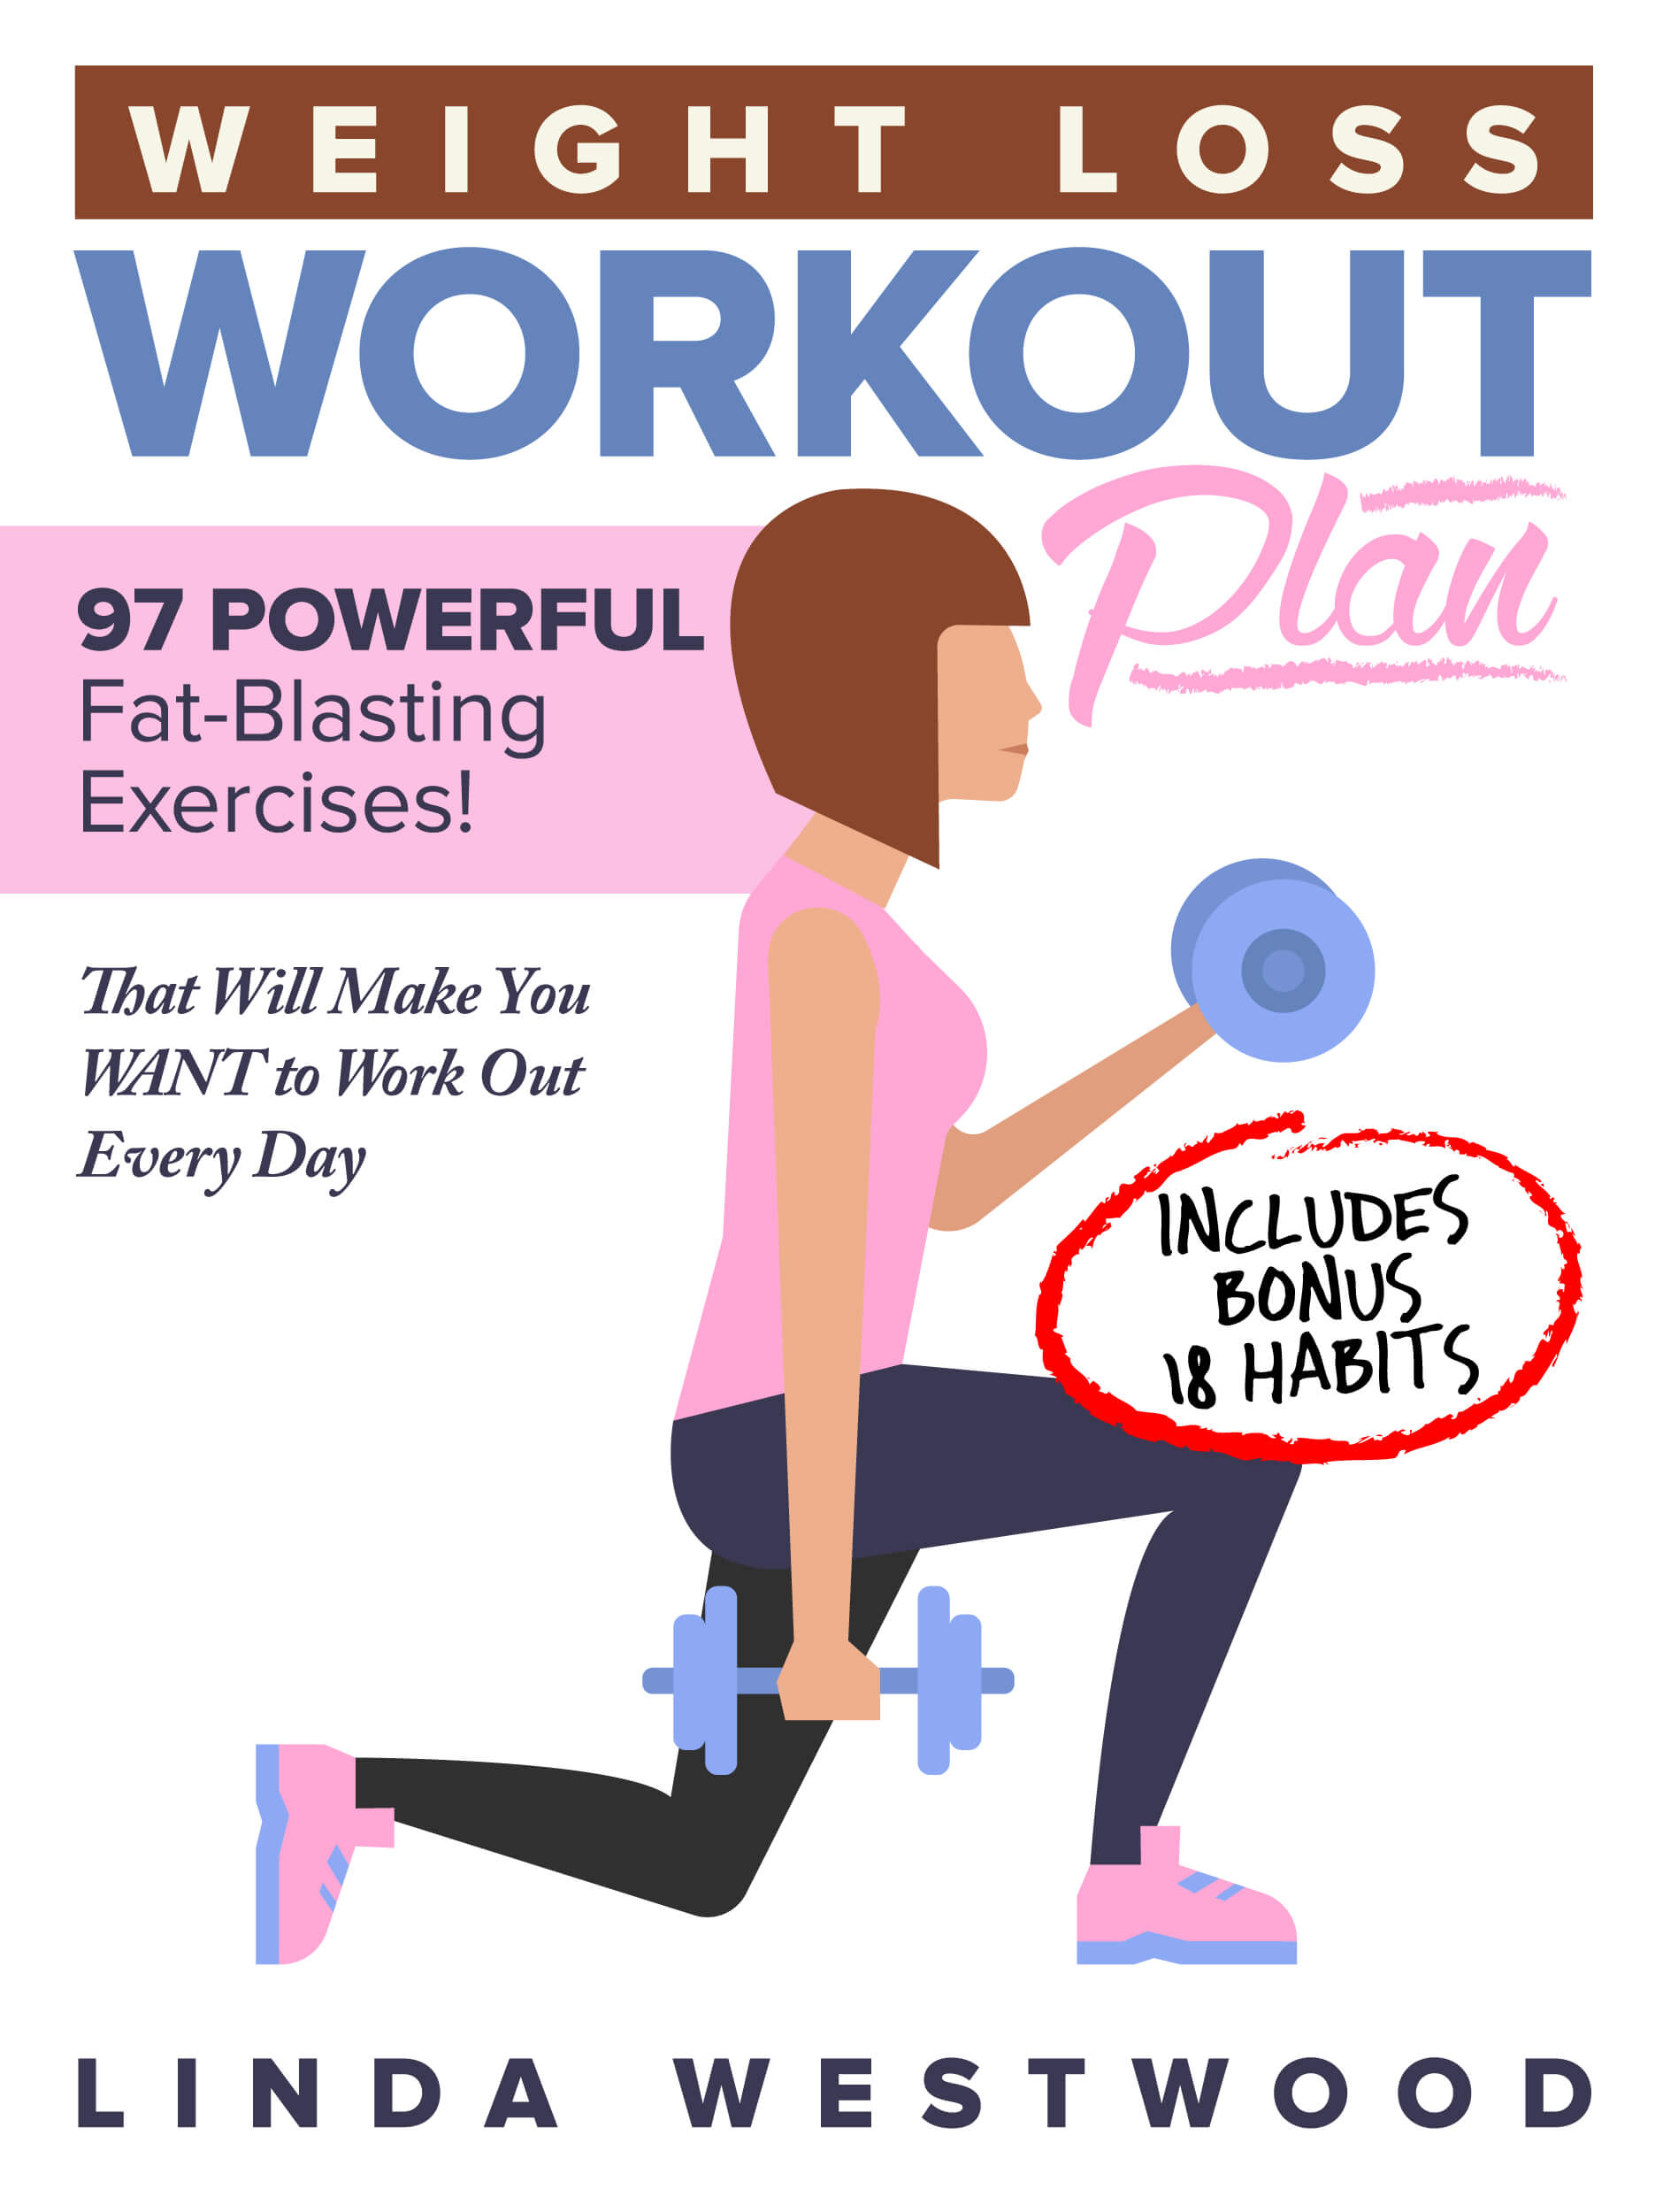 FREE: Weight Loss Workout Plan: 97 POWERFUL Fat-Blasting Exercises (Includes BONUS 18 Habits That Will Make You WANT to Work Out Every Day)! by Linda Westwood